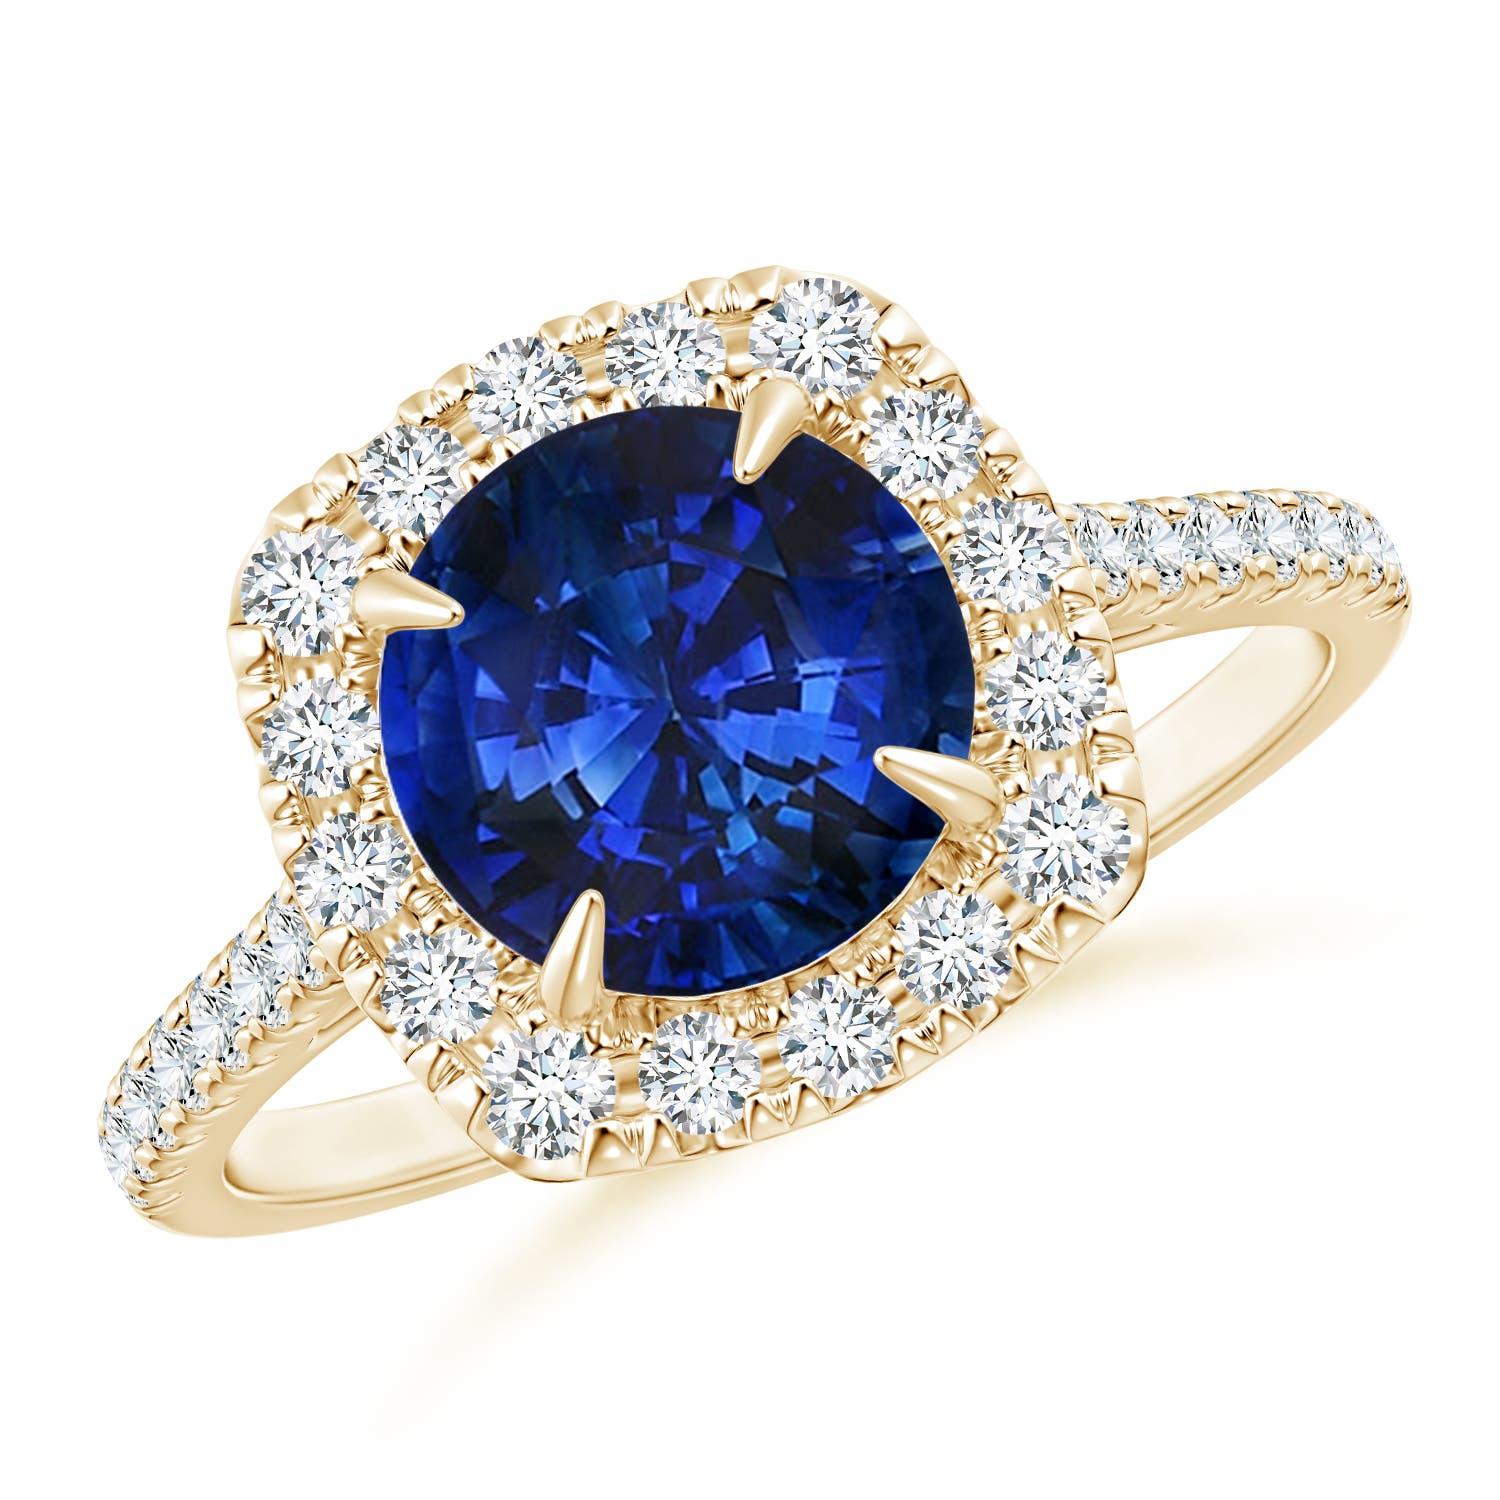 For Sale:  Angara Gia Certified Natural Sapphire Classic Cushion Halo Ring in Yellow Gold